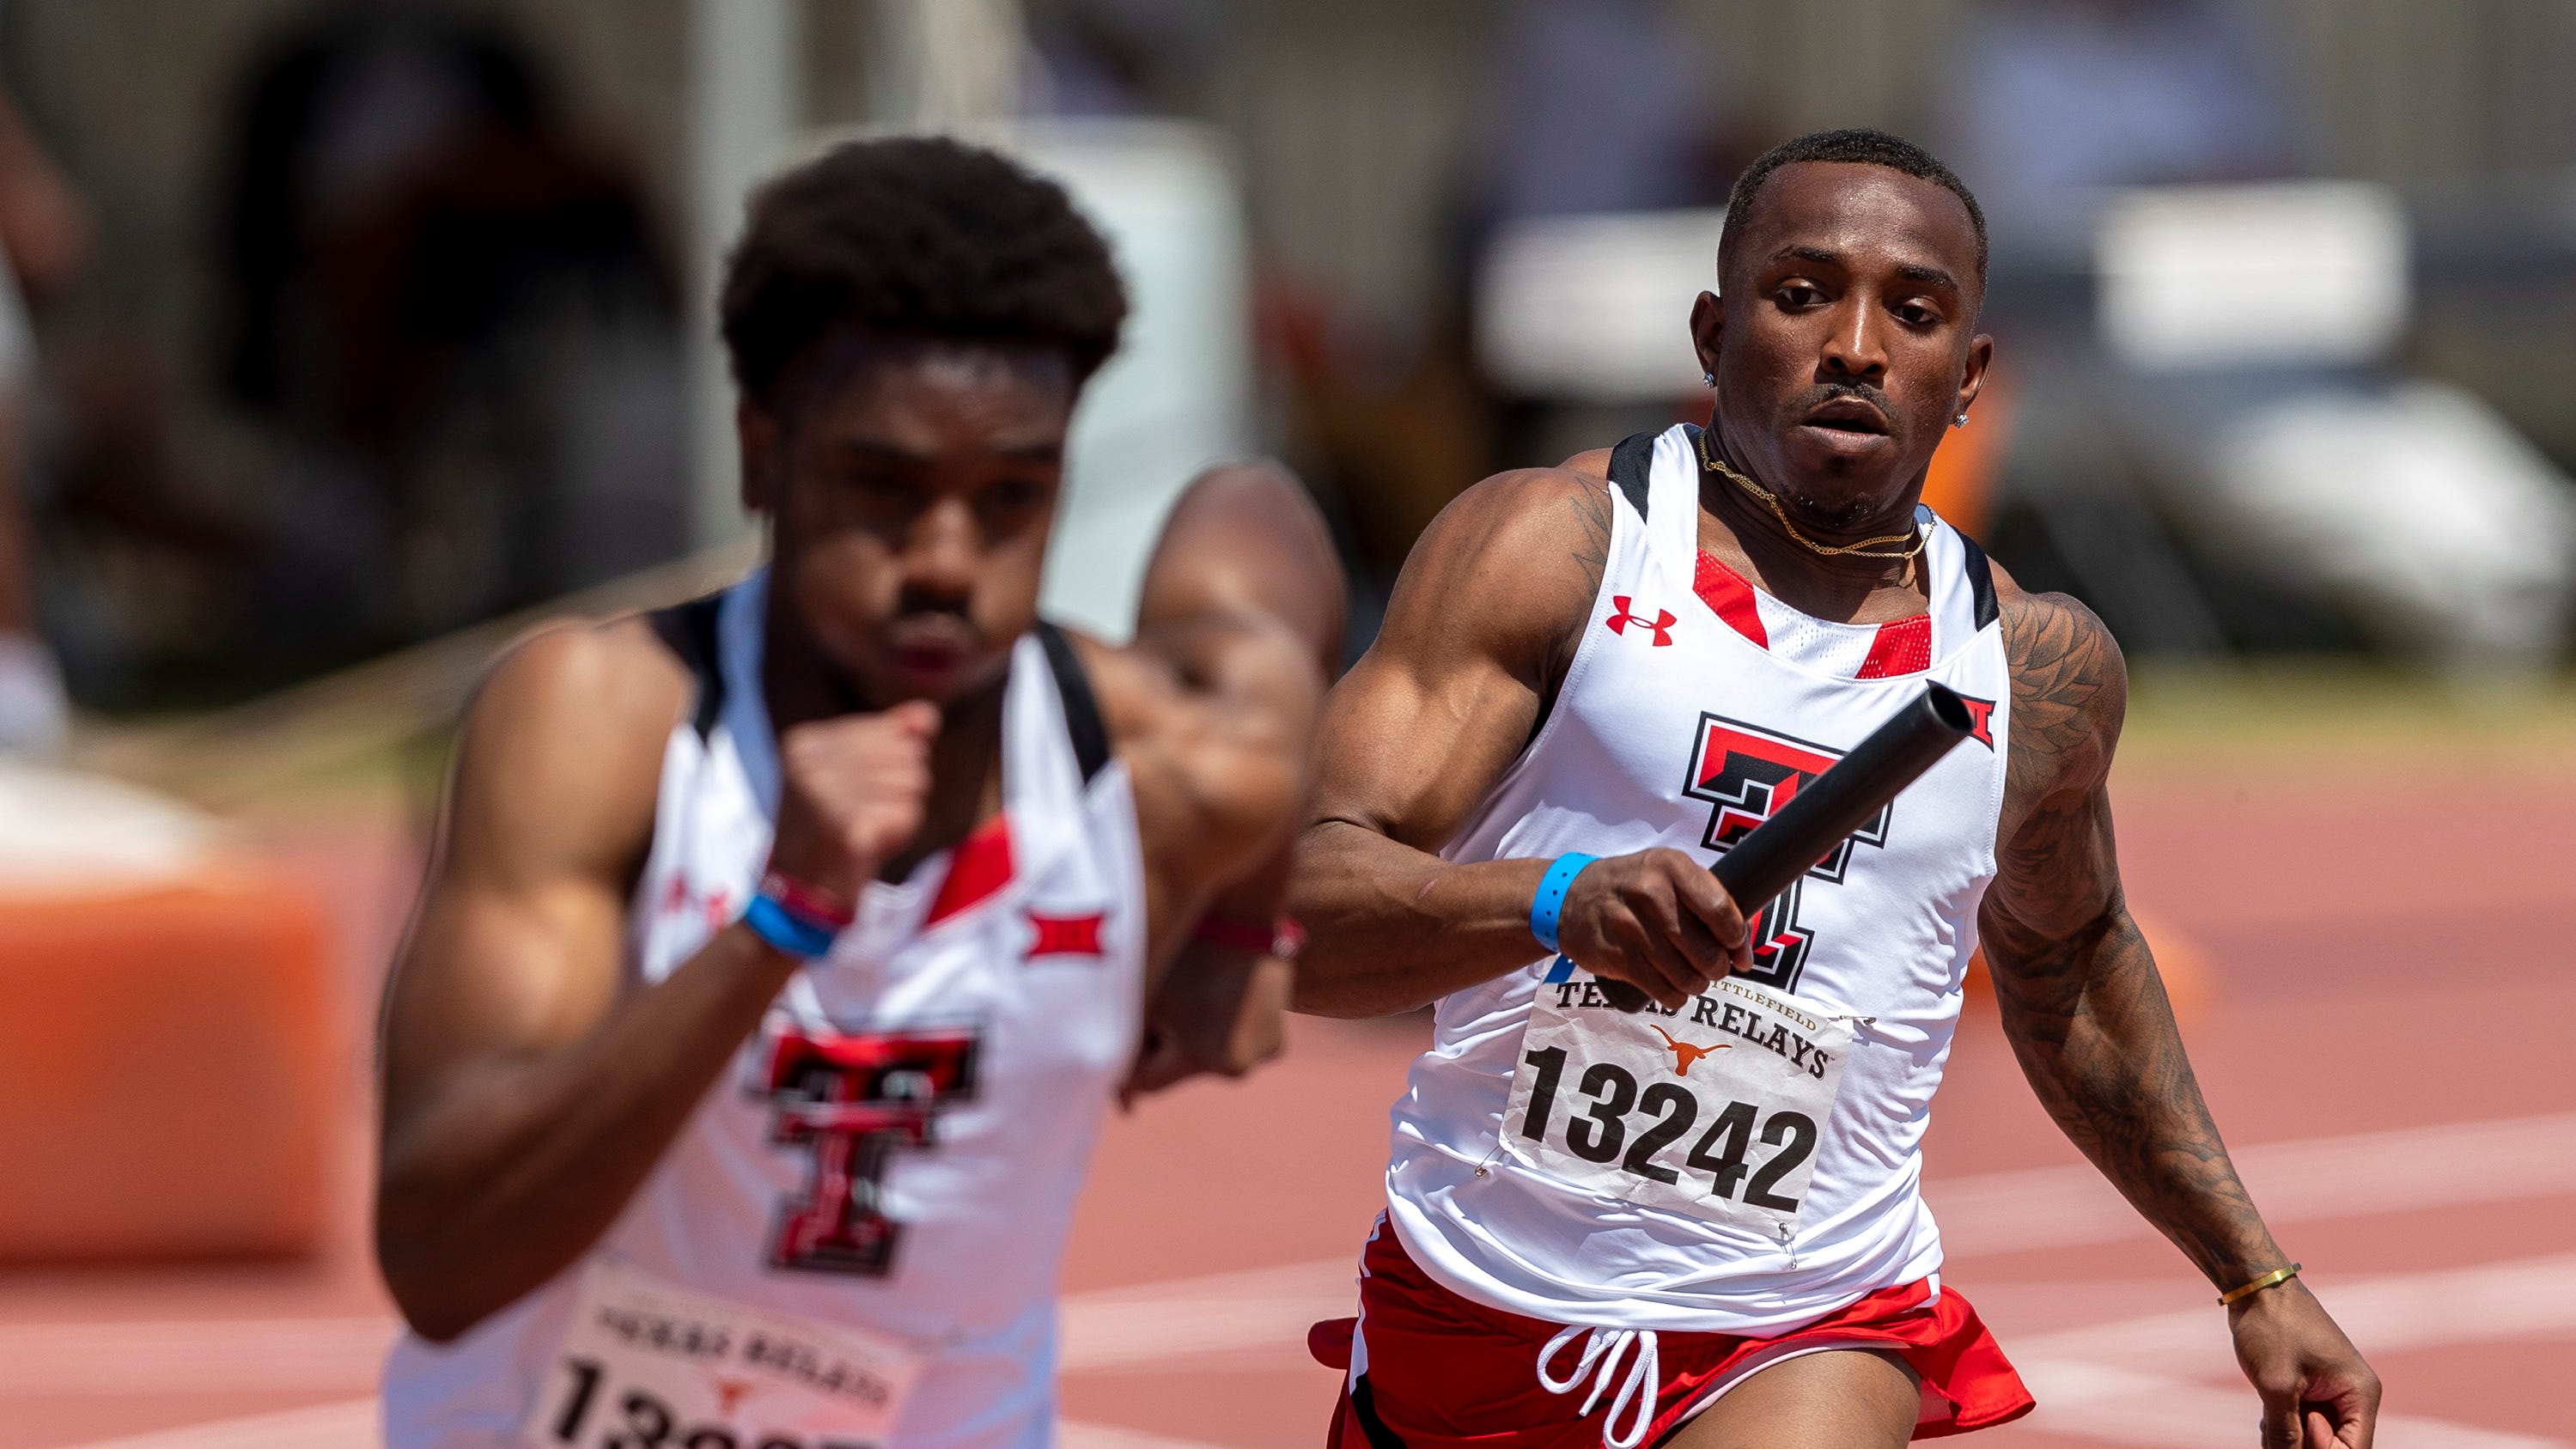 Track and field Texas Tech eager for competition in Masked Rider Open